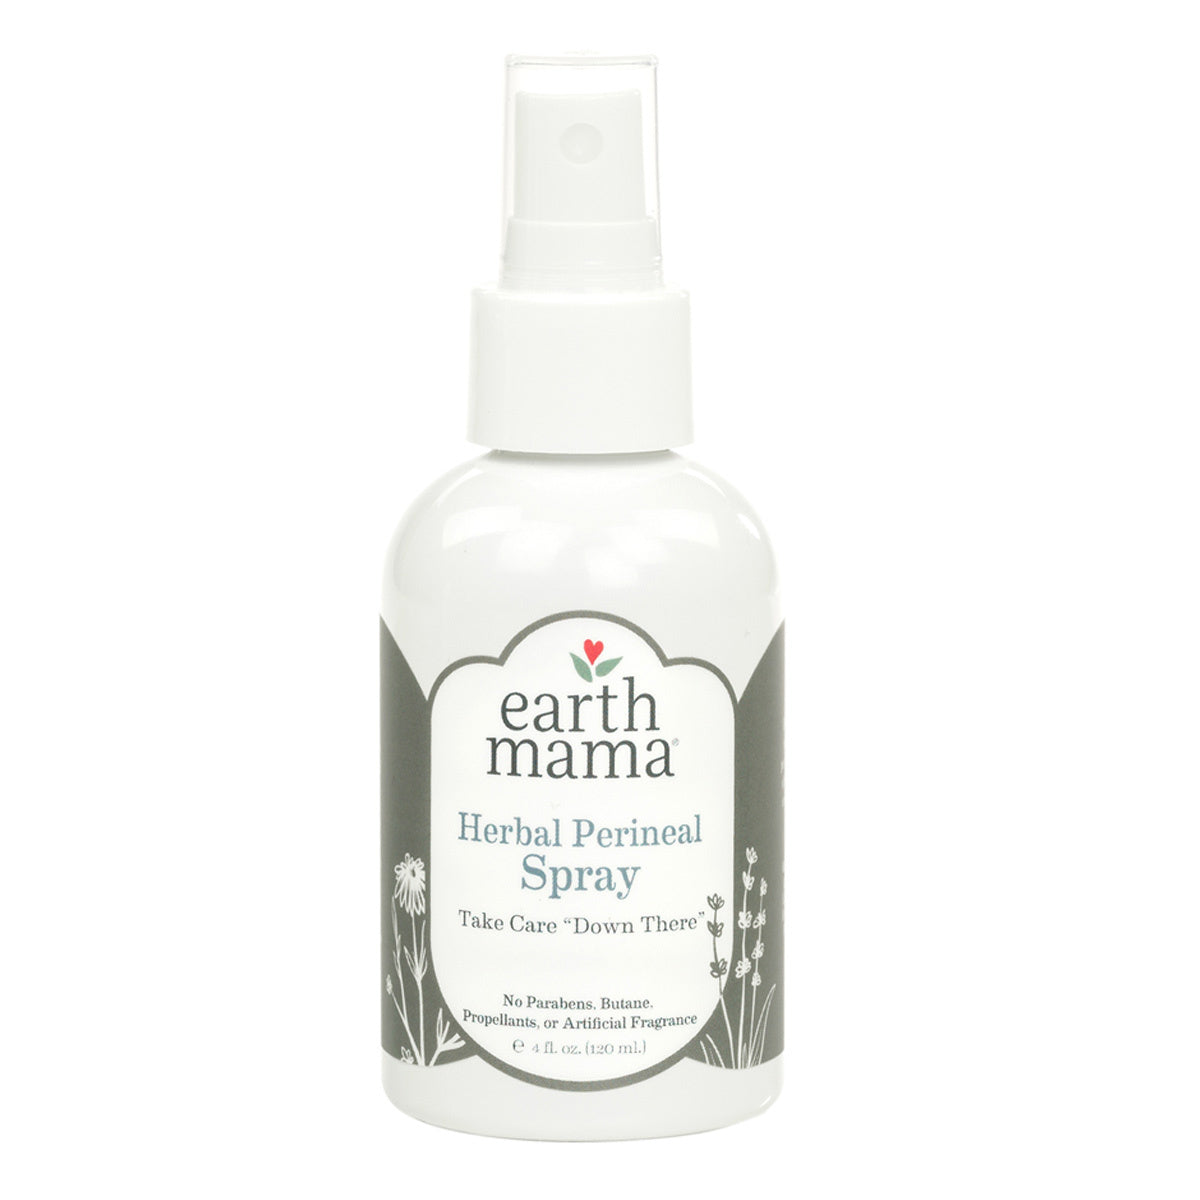 Primary image of Herbal Perineal Spray